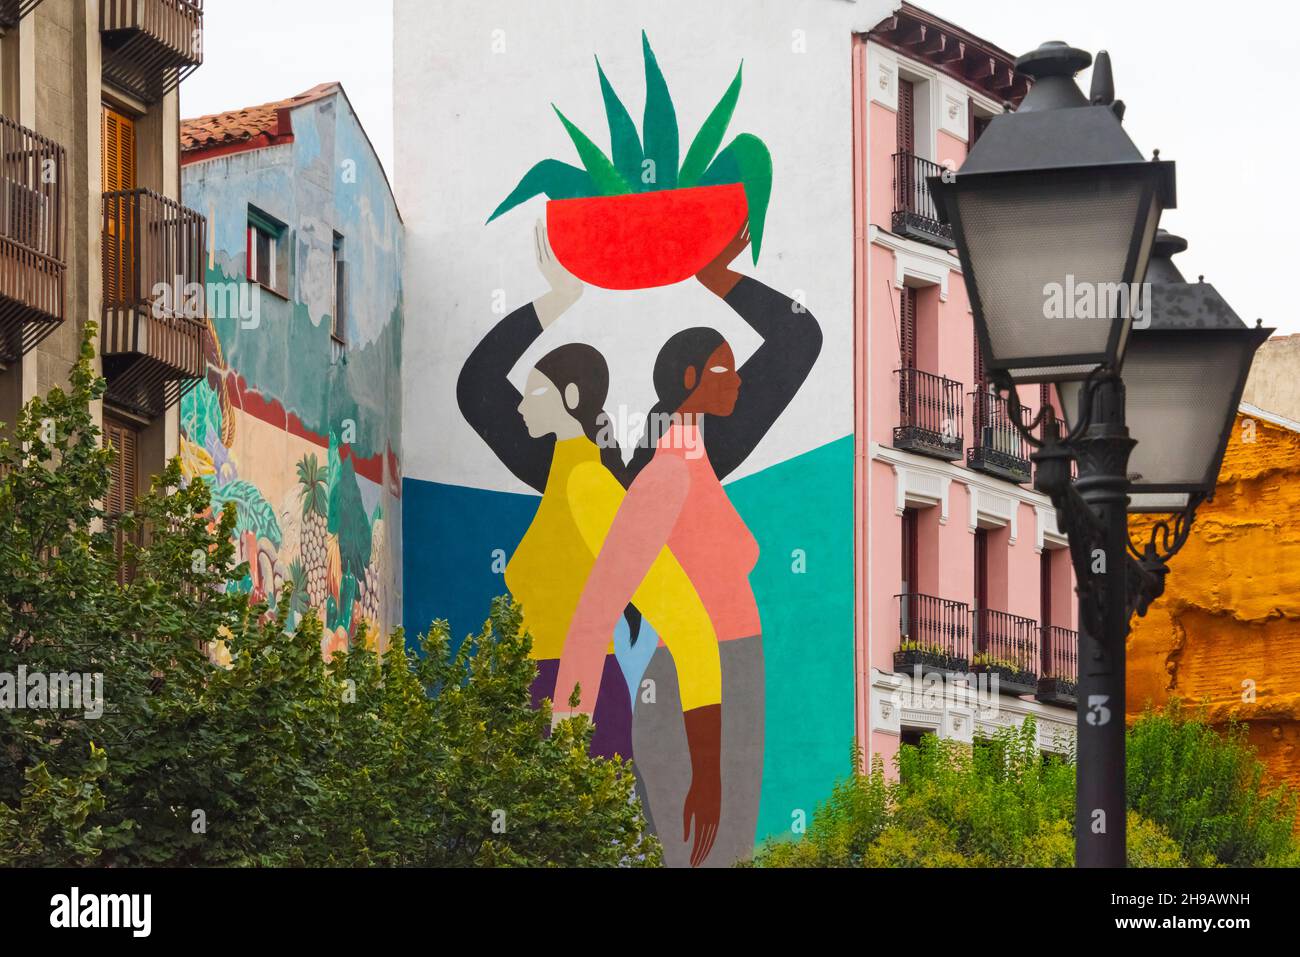 Building with huge mural, Madrid, Spain Stock Photo